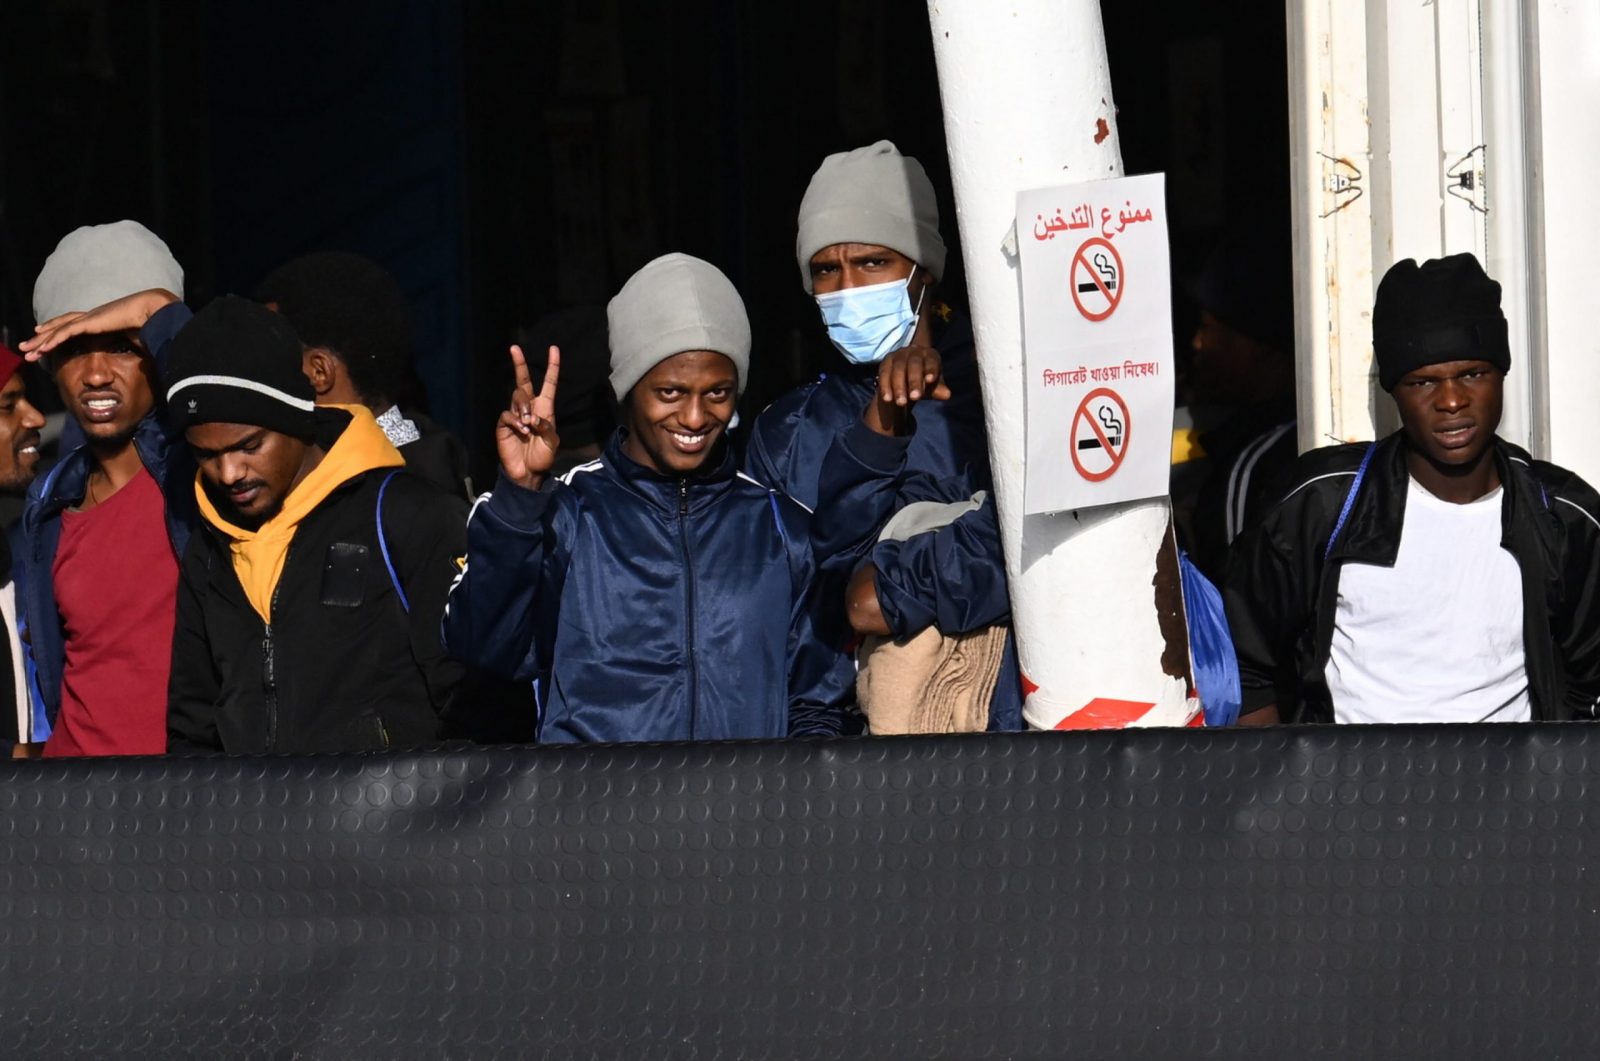 epa10360703 Migrants, among 248 migrants on board Ship Geo Barents, look on upon arrival at Salerno's harbor, southeast of Naples, Italy, 11 December 2022. Migrant rescue ship Geo Barents, operated by the Doctors Without Borders (MSF) organization, was allowed to dock at Salerno port to disembark the 248 survivors currently on board, including women and children, the NGO said.  EPA/Massimo Pica ITALY OUT